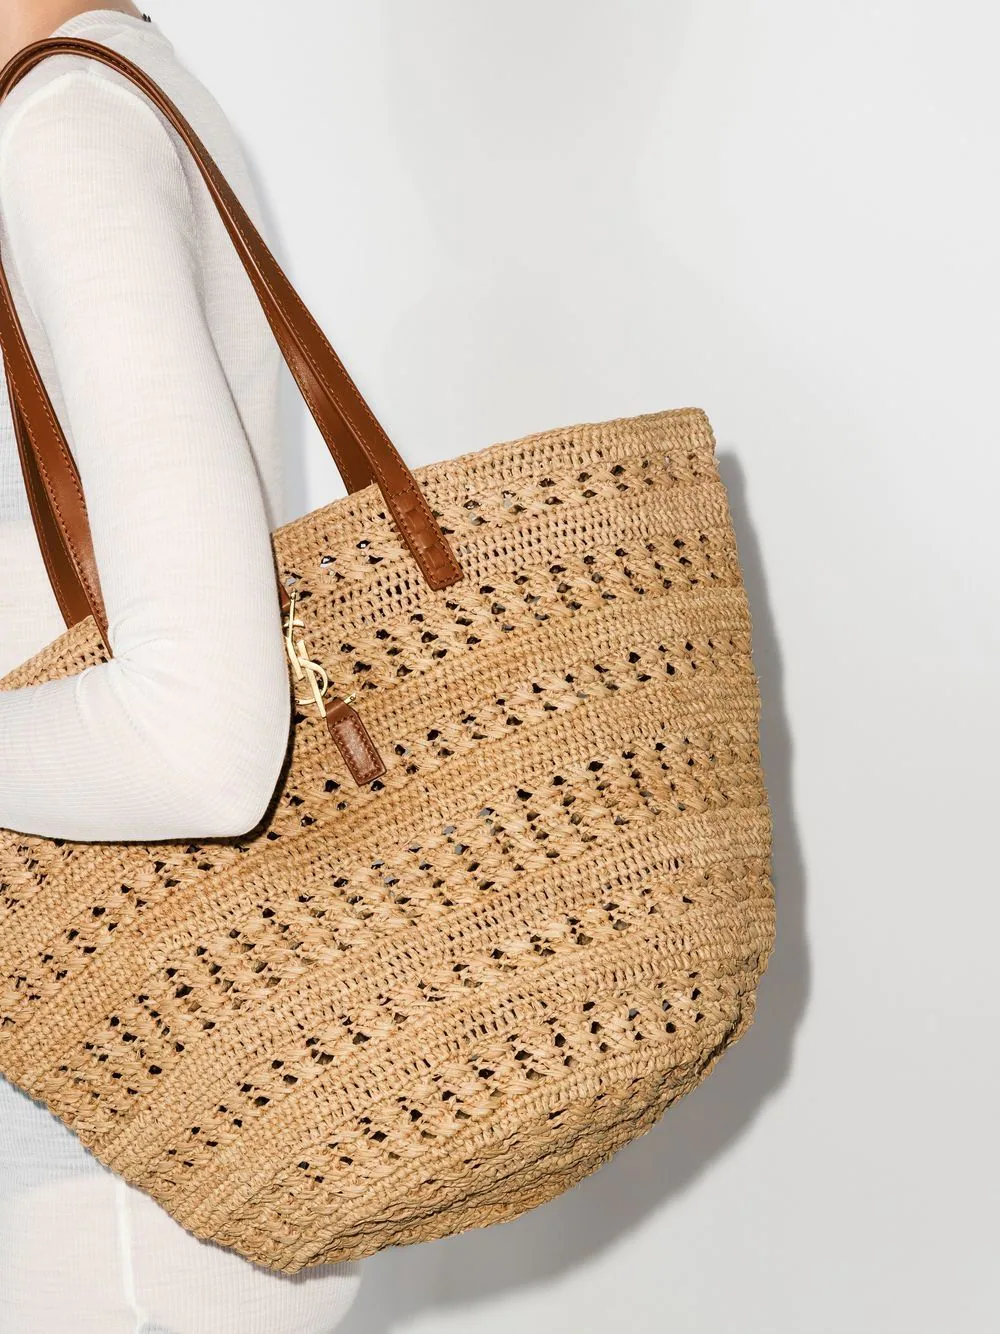 5 Designer Crochet Bags to Embrace the Craftcore Fashion!